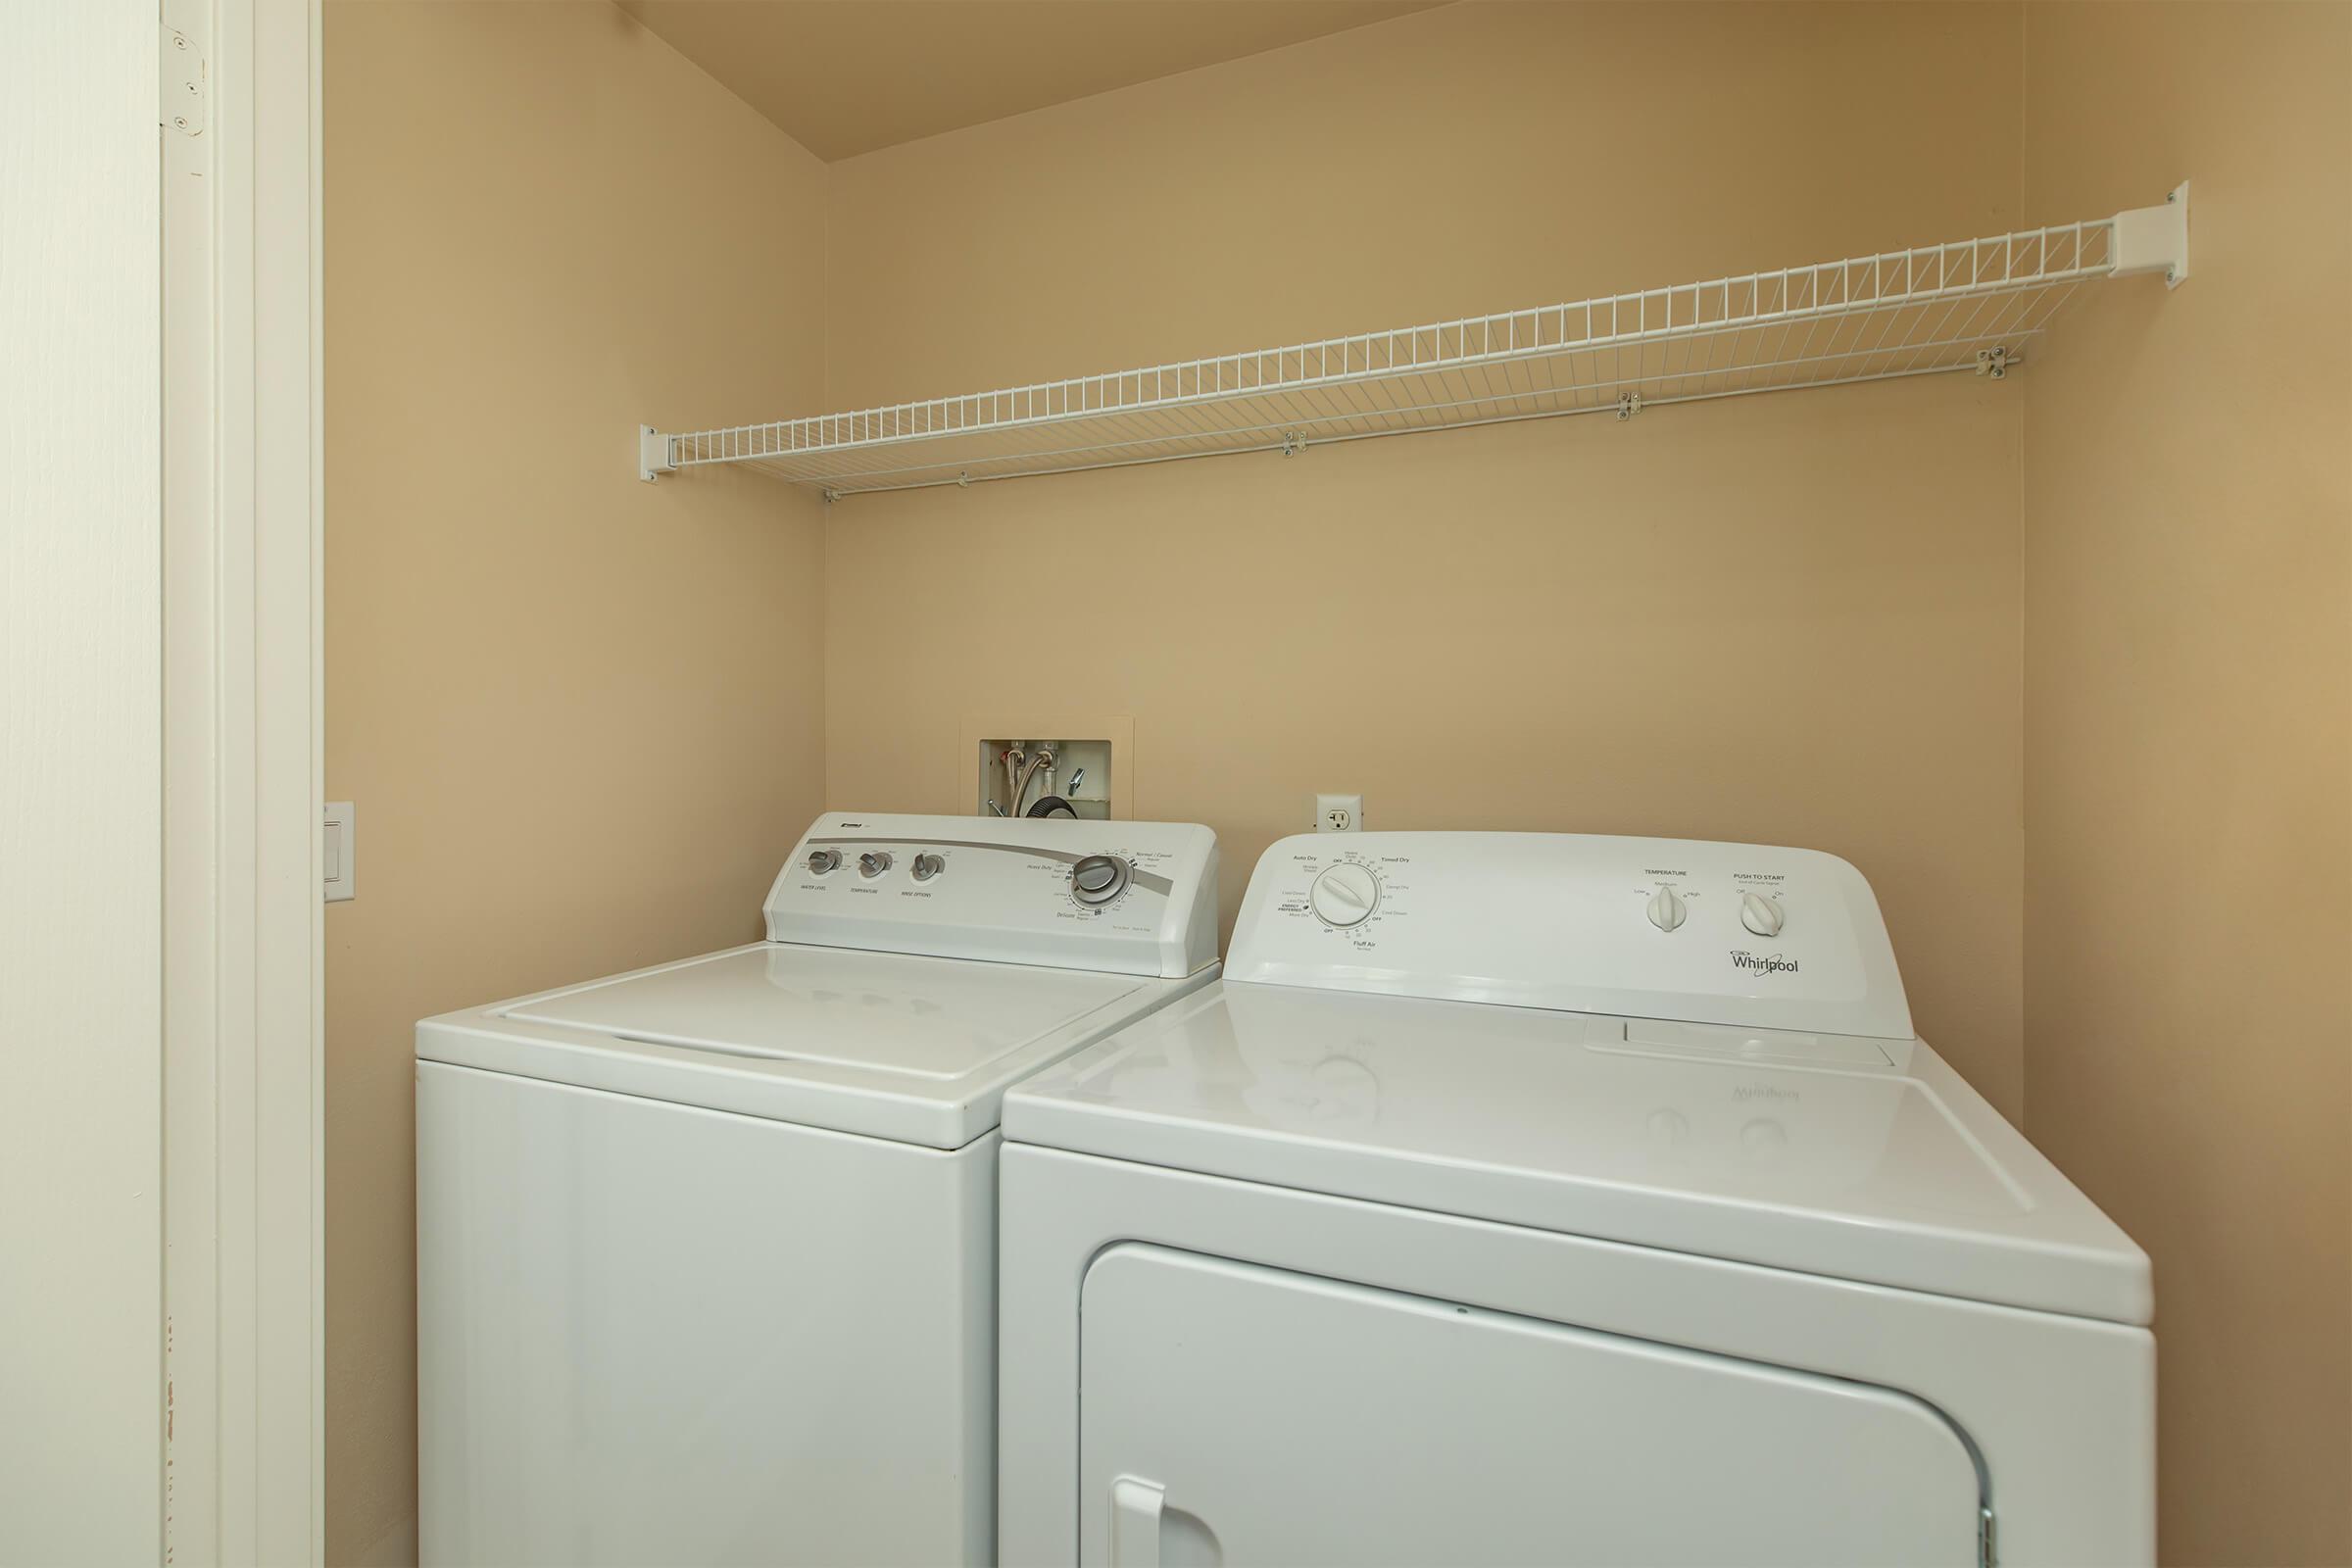 washer and dryer in the community laundry closet